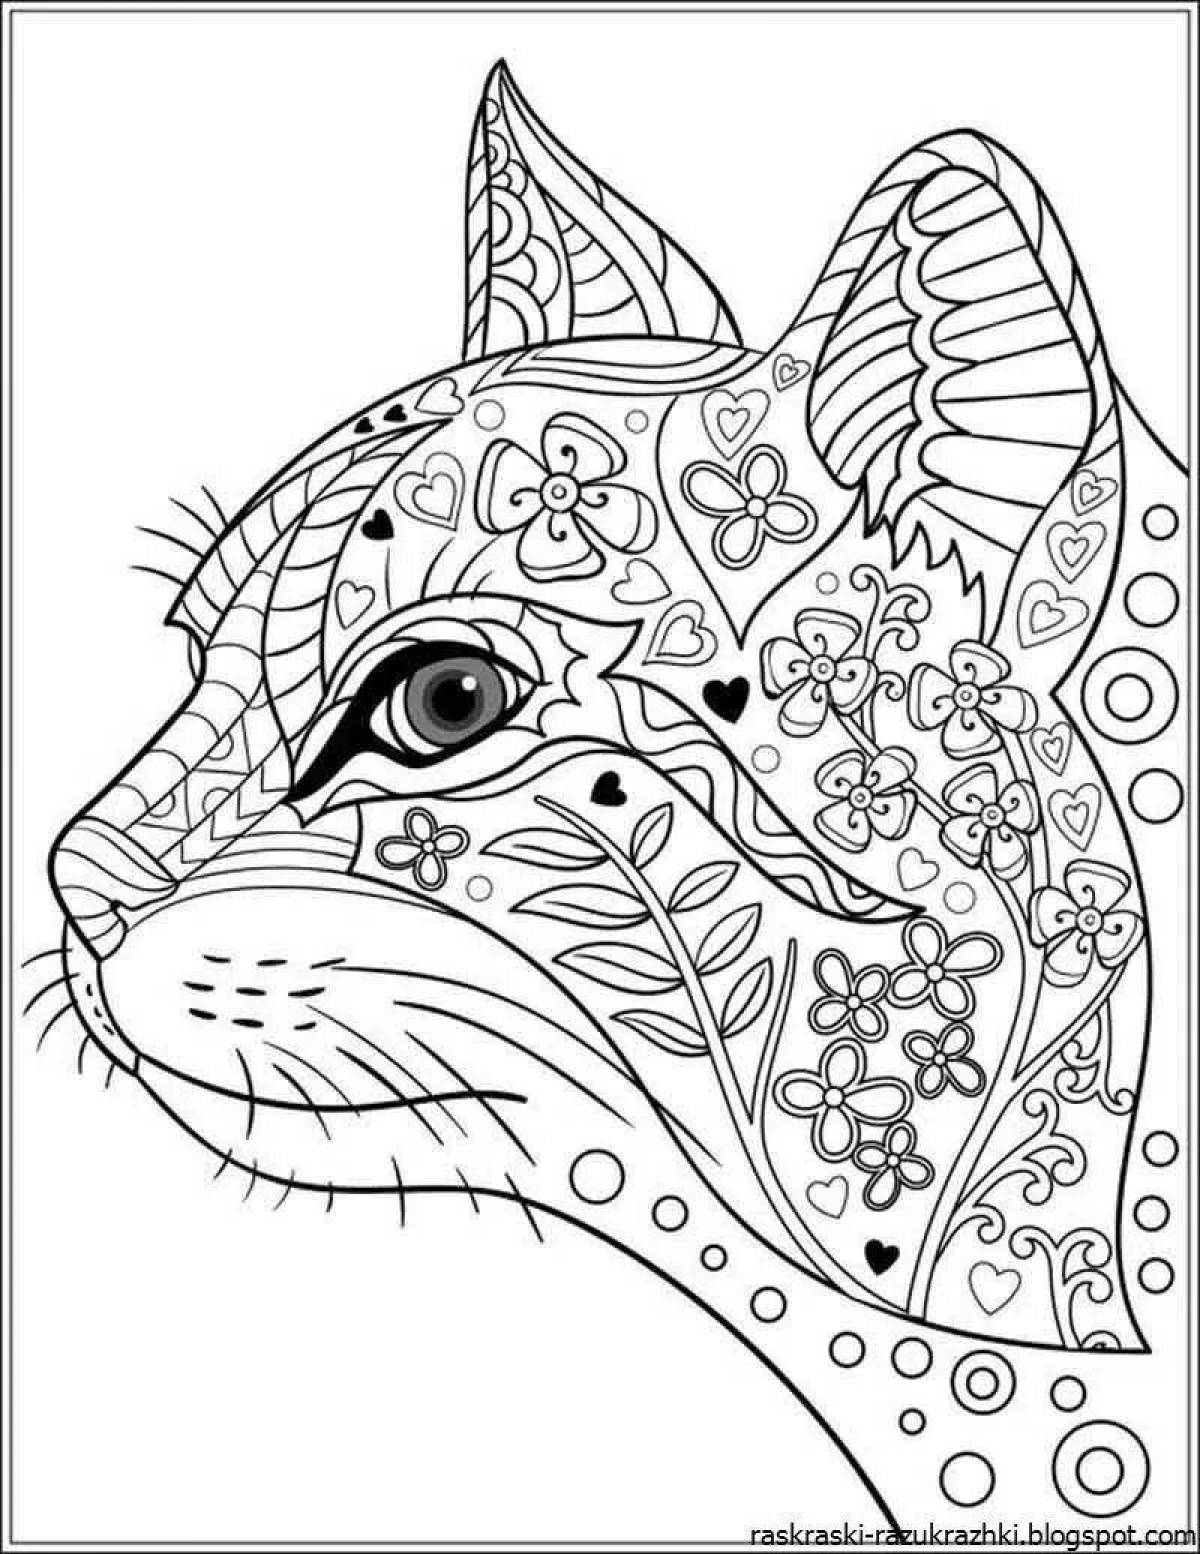 Bright antistress coloring book for girls 8 years old